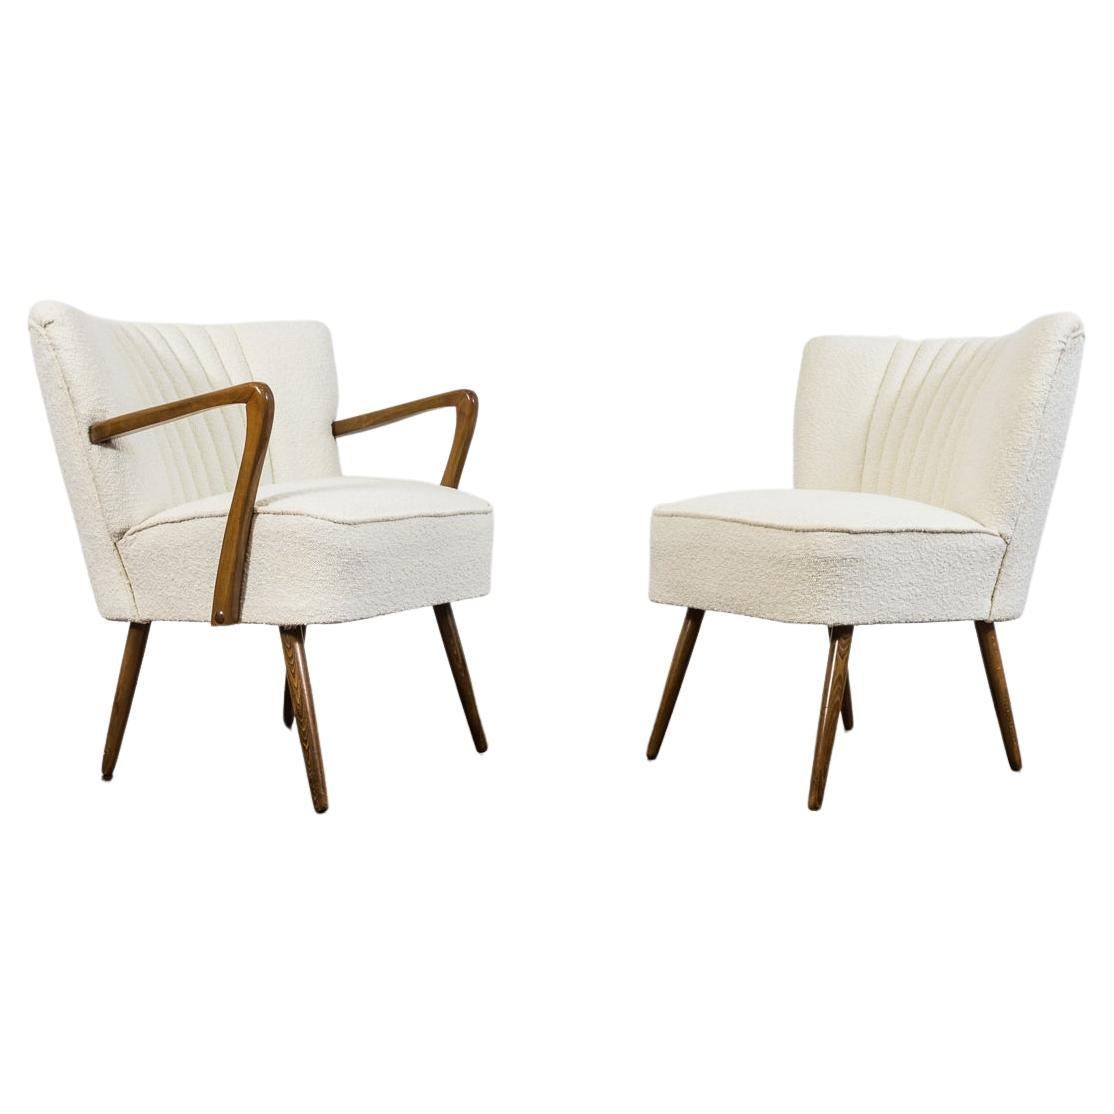 Pair of White Cream Bouclé Cocktail Chairs, 1950s